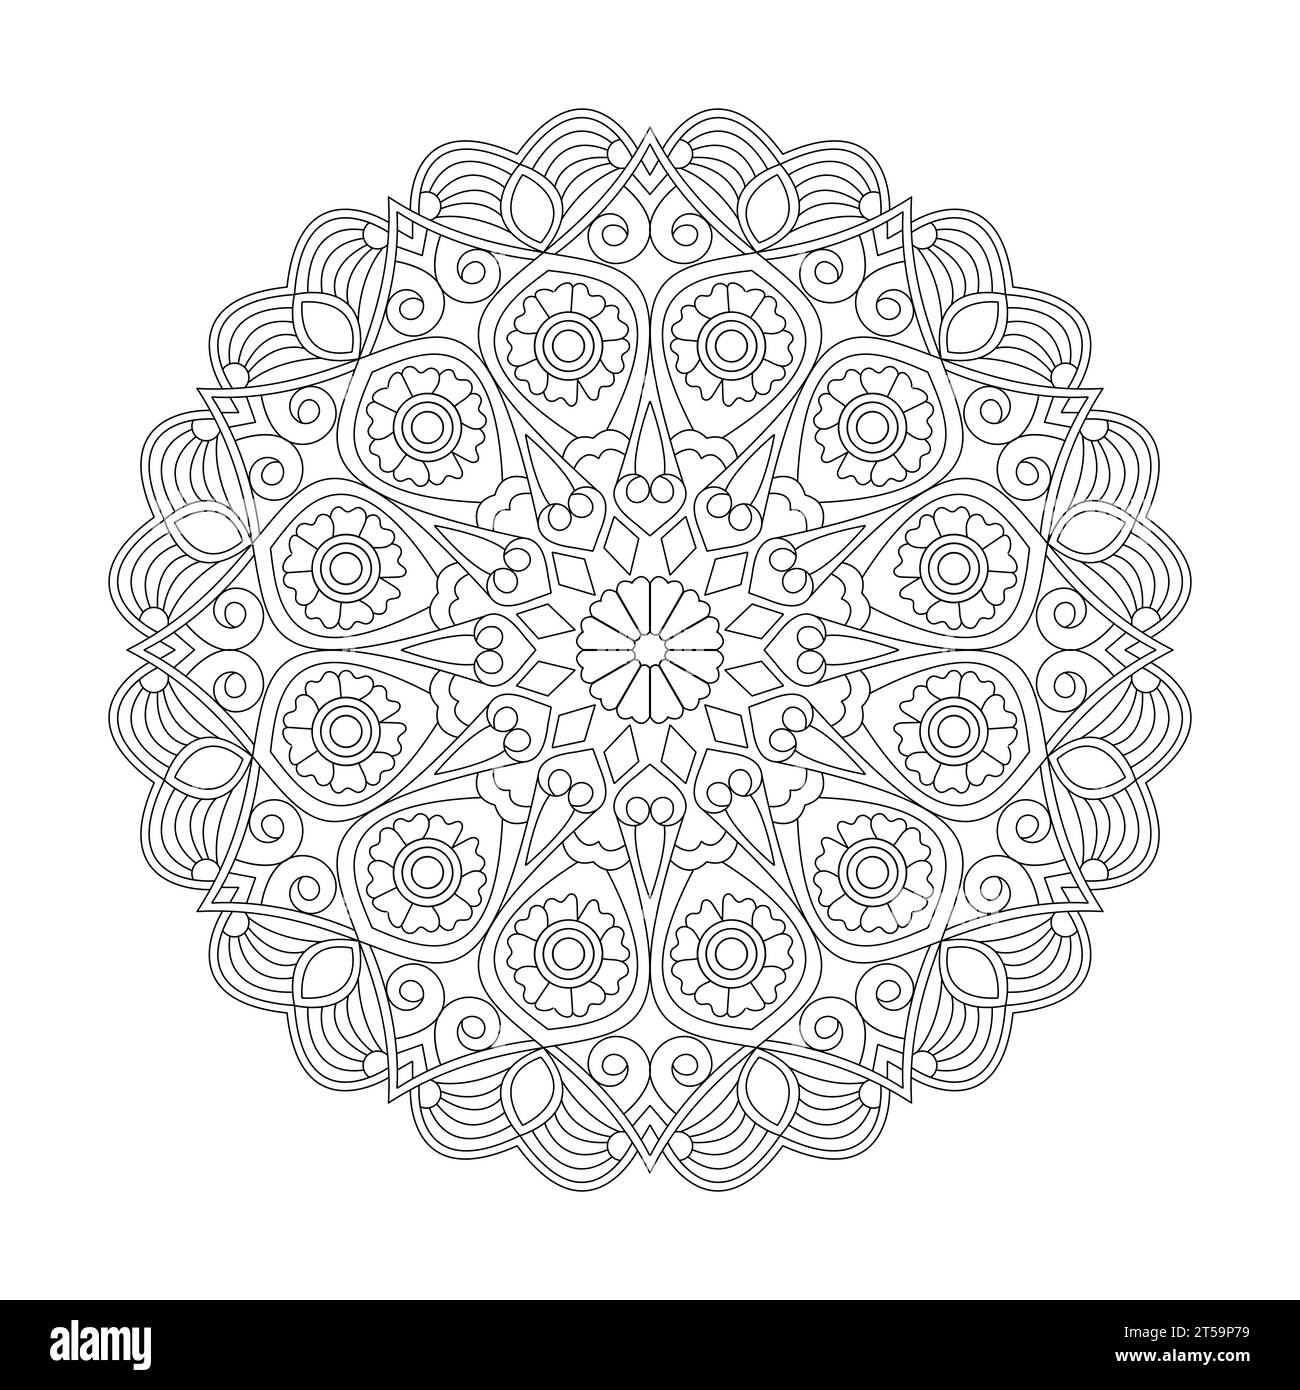 Lotus love adult colouring book mandala page for KDP book interior. Peaceful Petals, Ability to Relax, Brain Experiences, Harmonious Haven, Peaceful Po Stock Vector